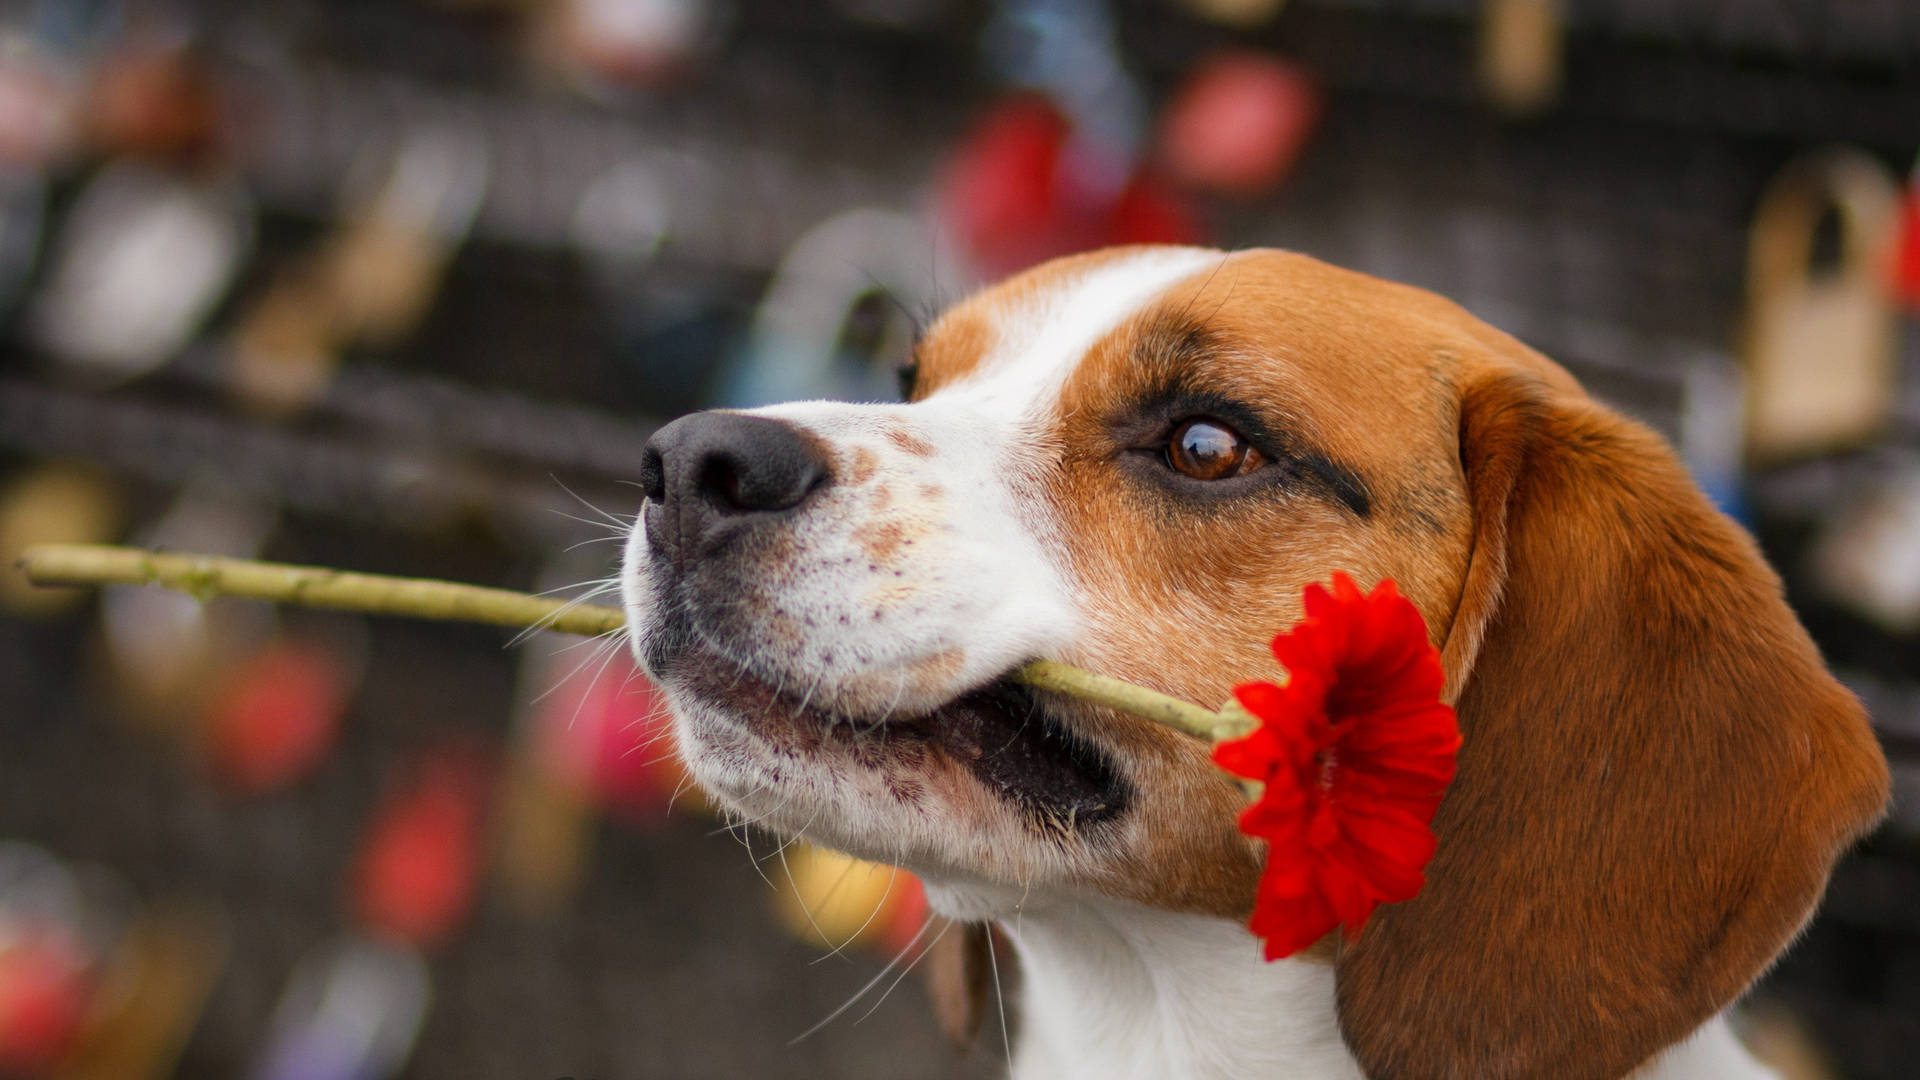 Cute Beagle Dog With Red Flower Background